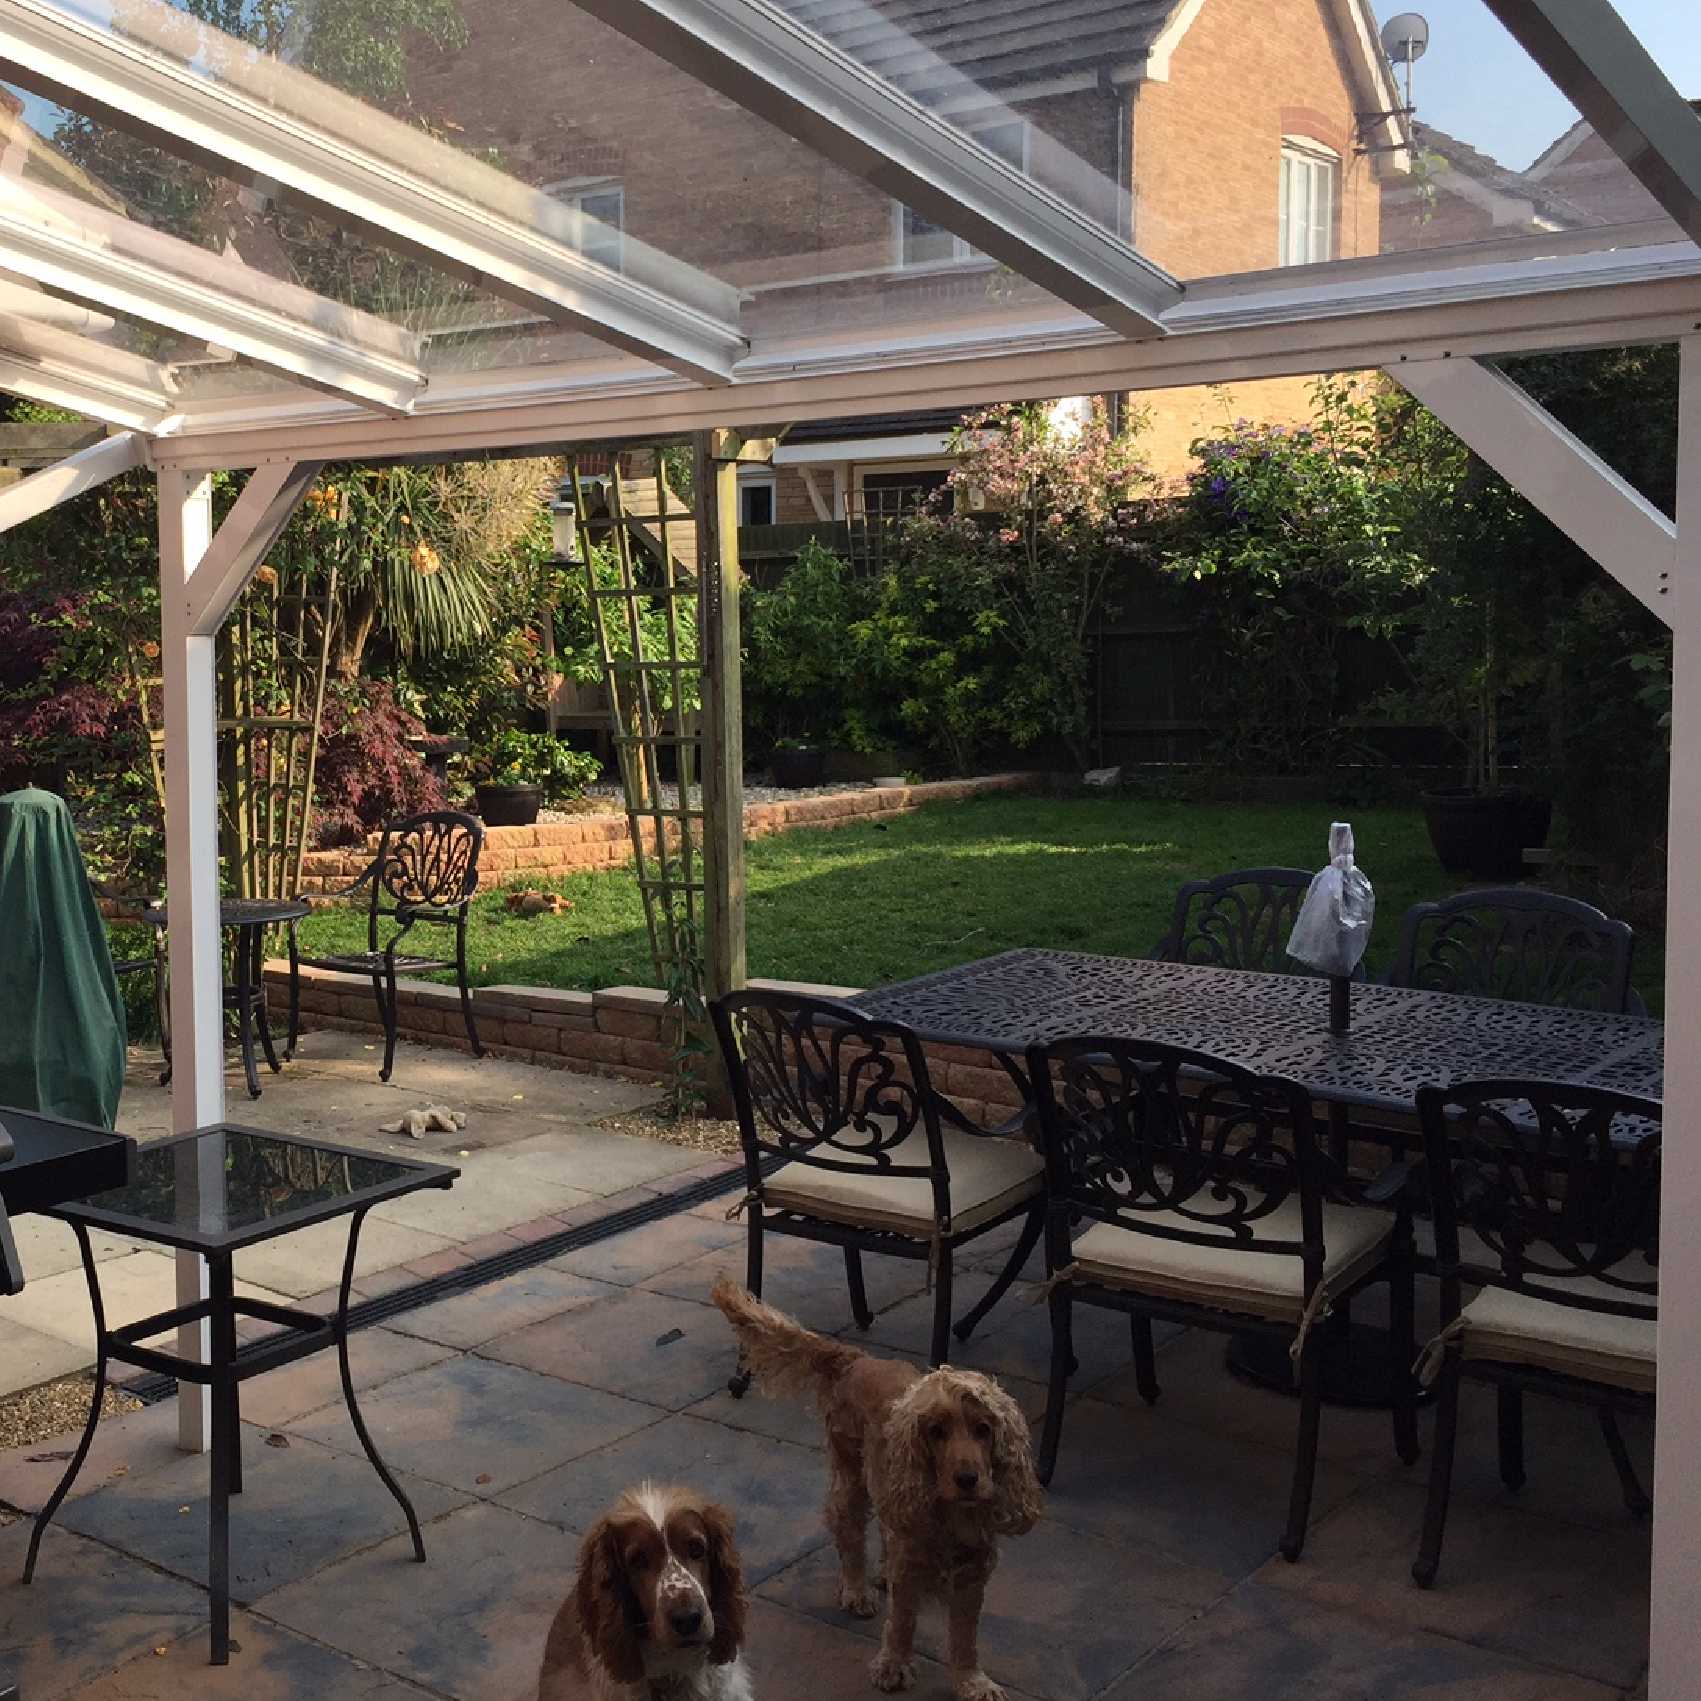 Affordable Omega Smart Lean-To Canopy, White UNGLAZED for 6mm Glazing - 7.7m (W) x 2.0m (P), (4) Supporting Posts